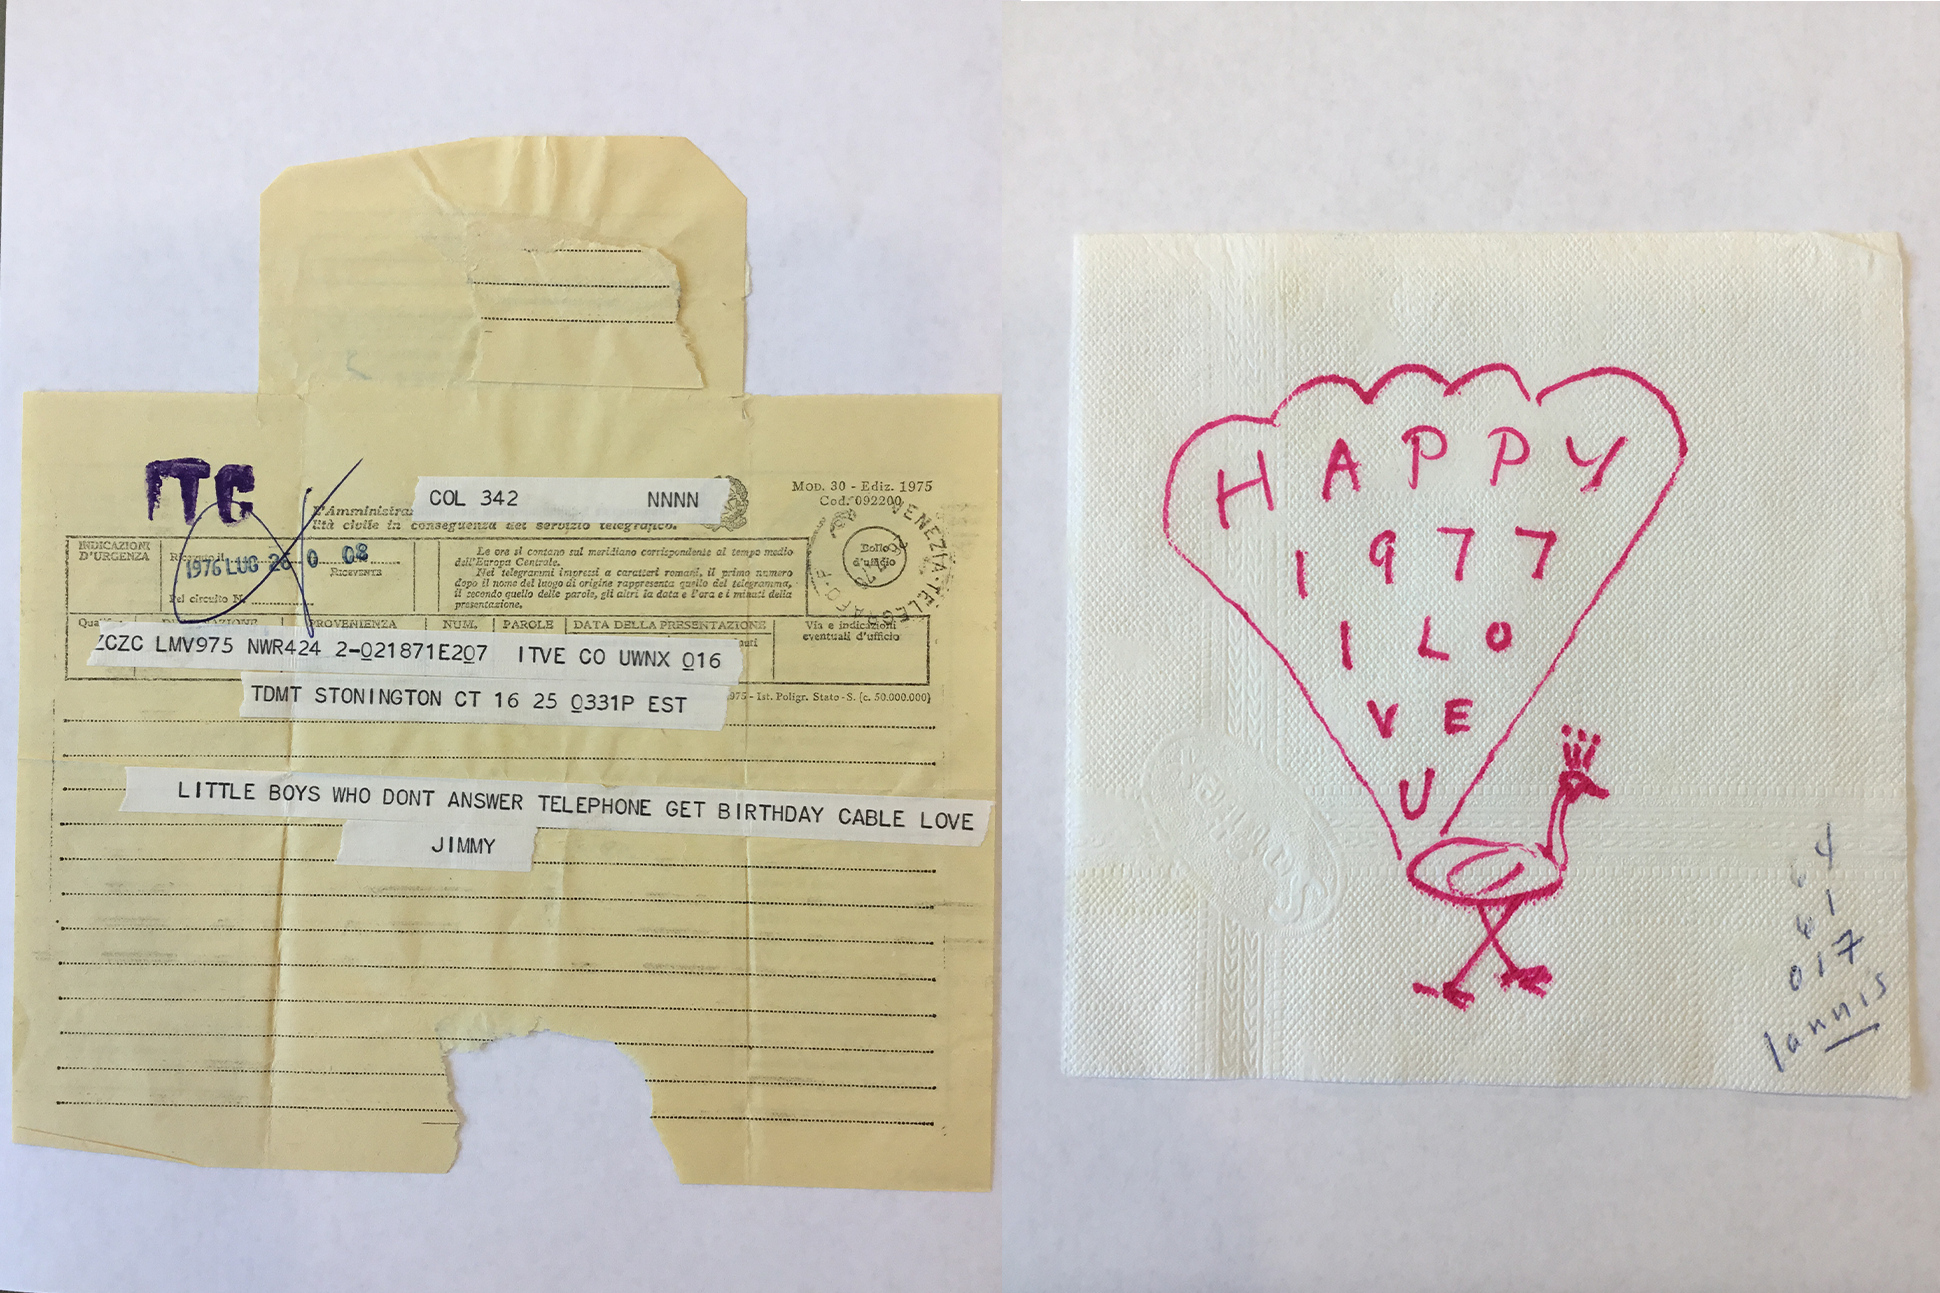 Photographs of two archival items, an envelope and a napkin, from James Merrill's papers.